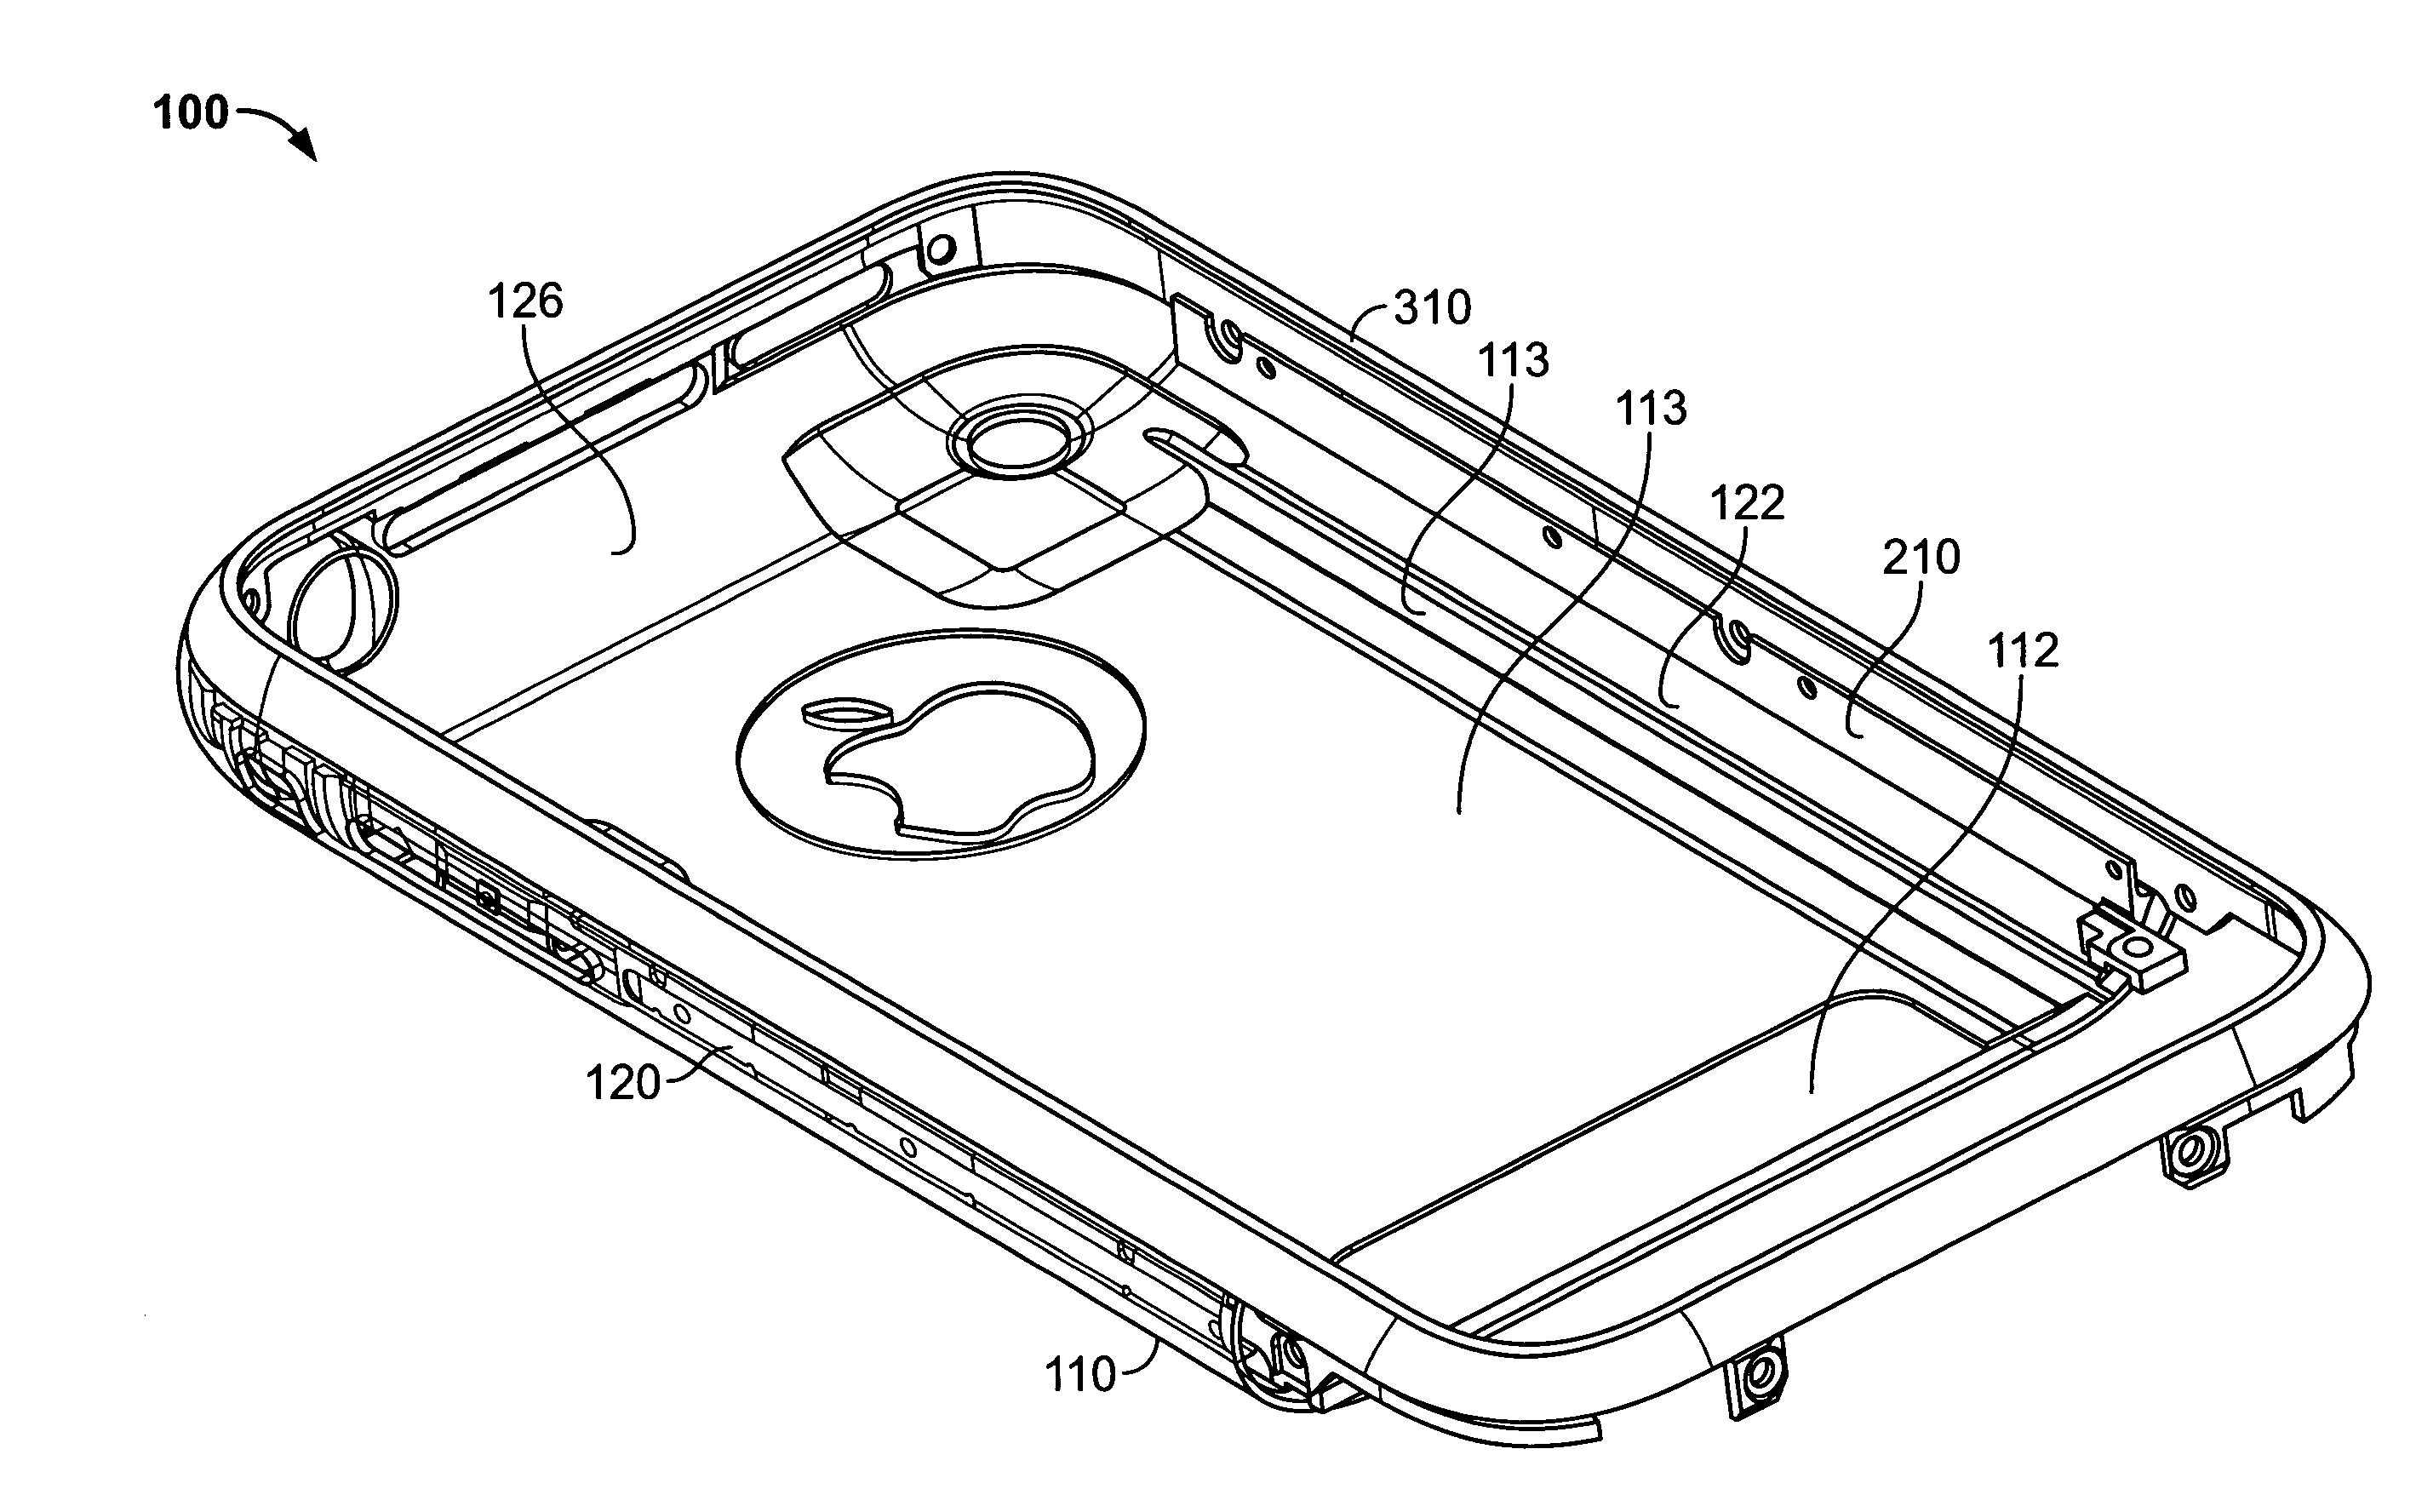 Cold worked metal housing for a portable electronic device